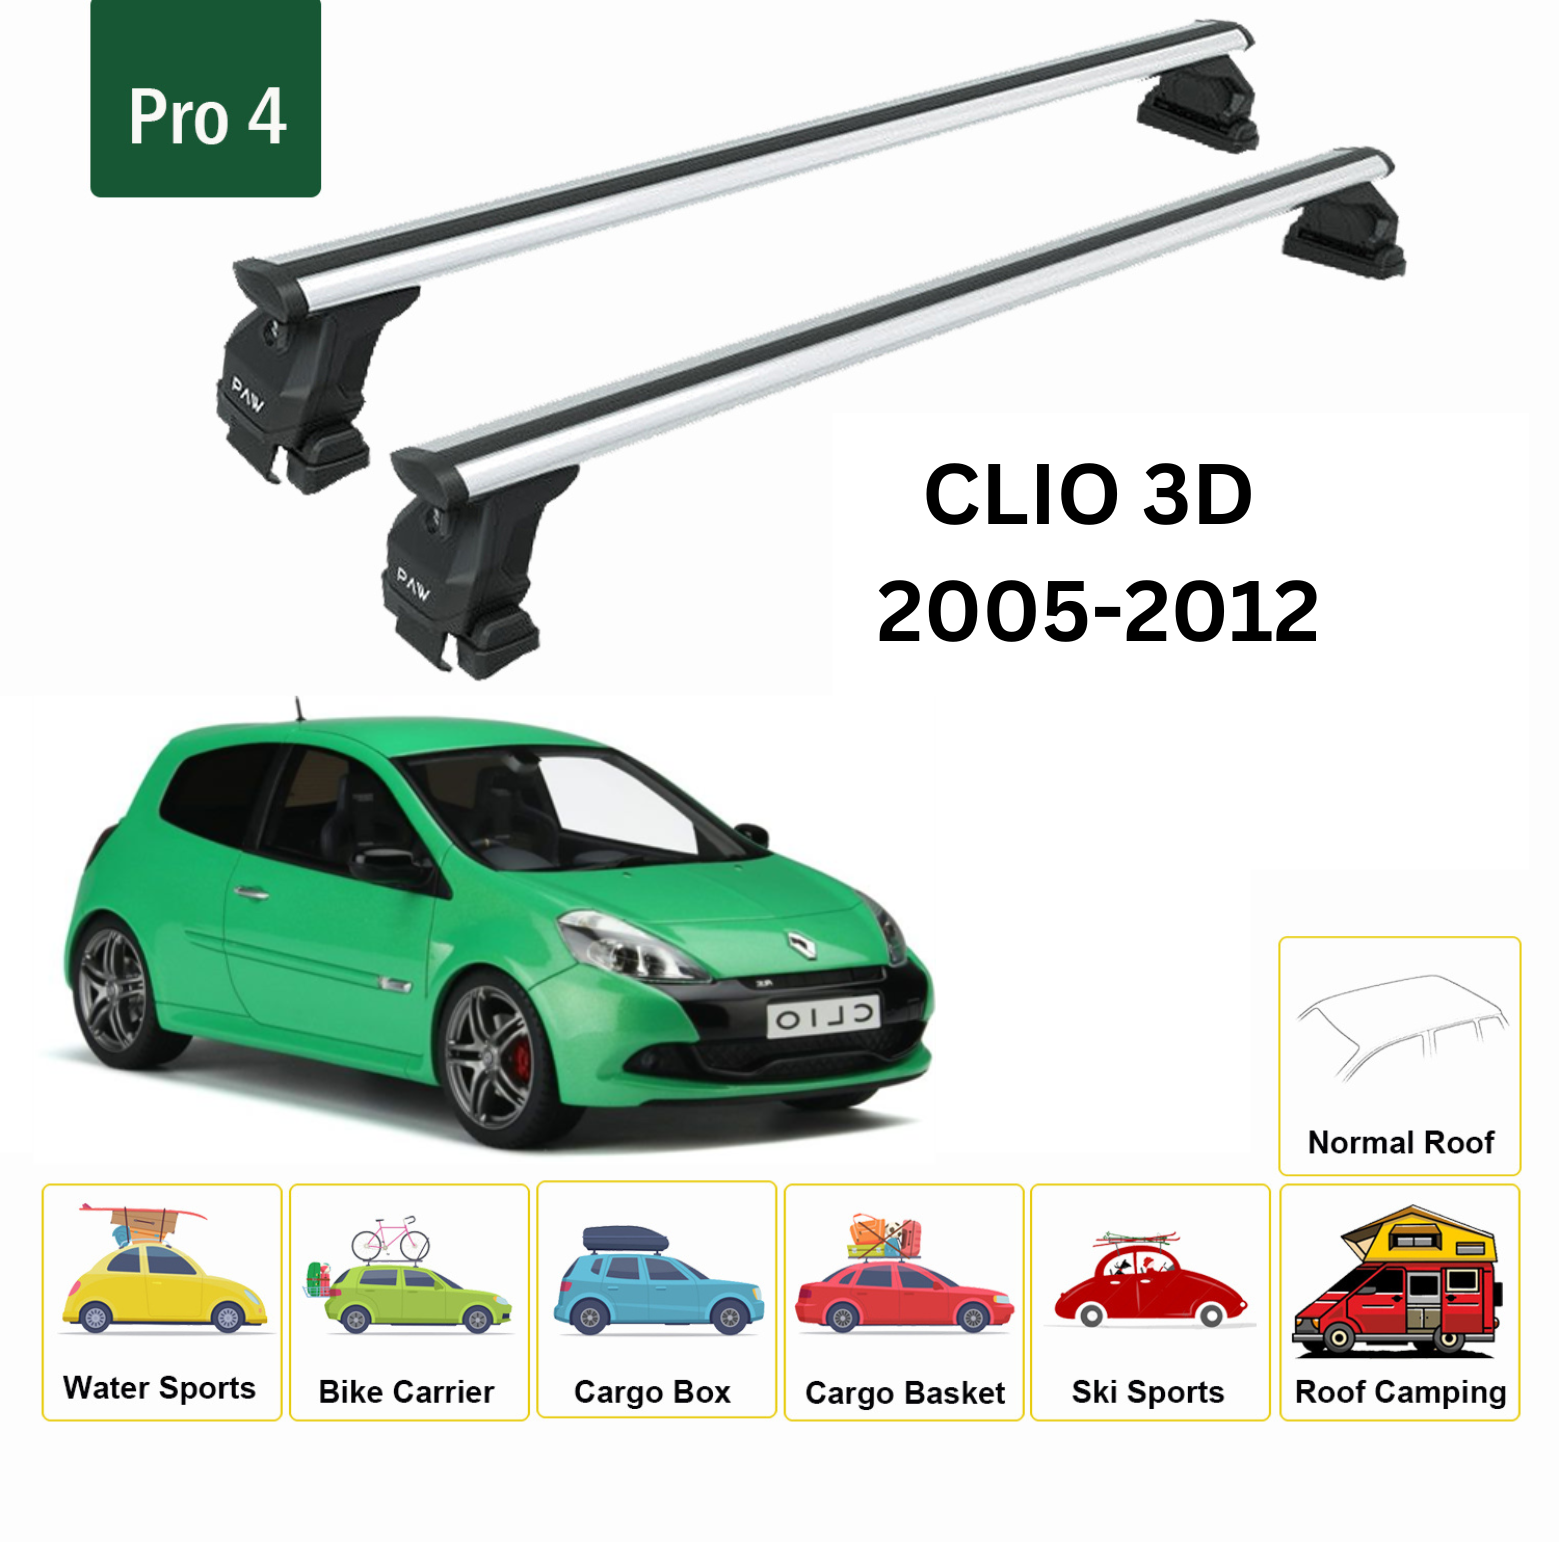 For Renault Clio 3D 2005-2012 Roof Rack System, Aluminium Cross Bar, Metal Bracket, Normal Roof, Silver - 0